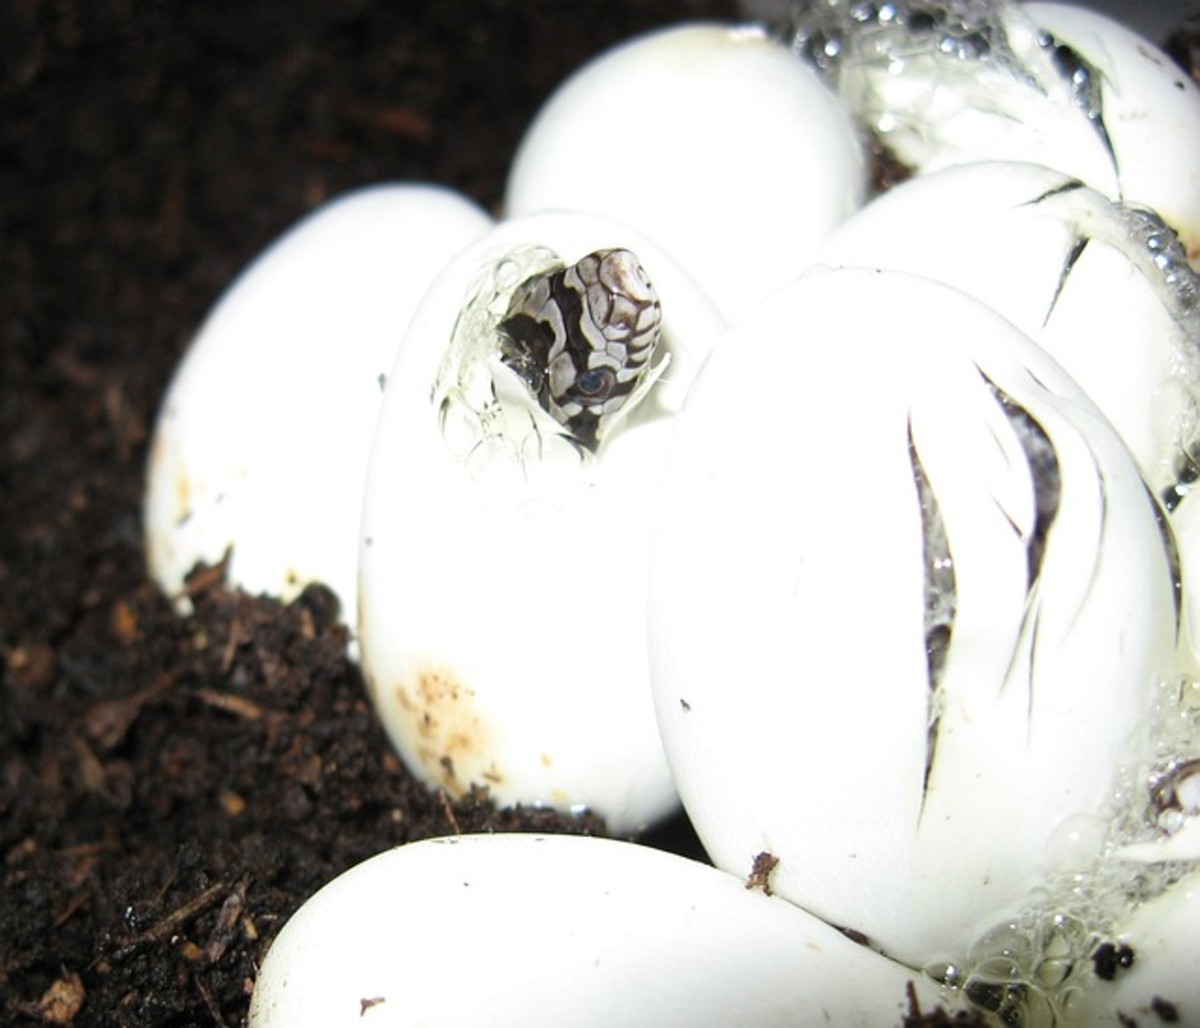 Most snakes lay eggs like other reptiles.